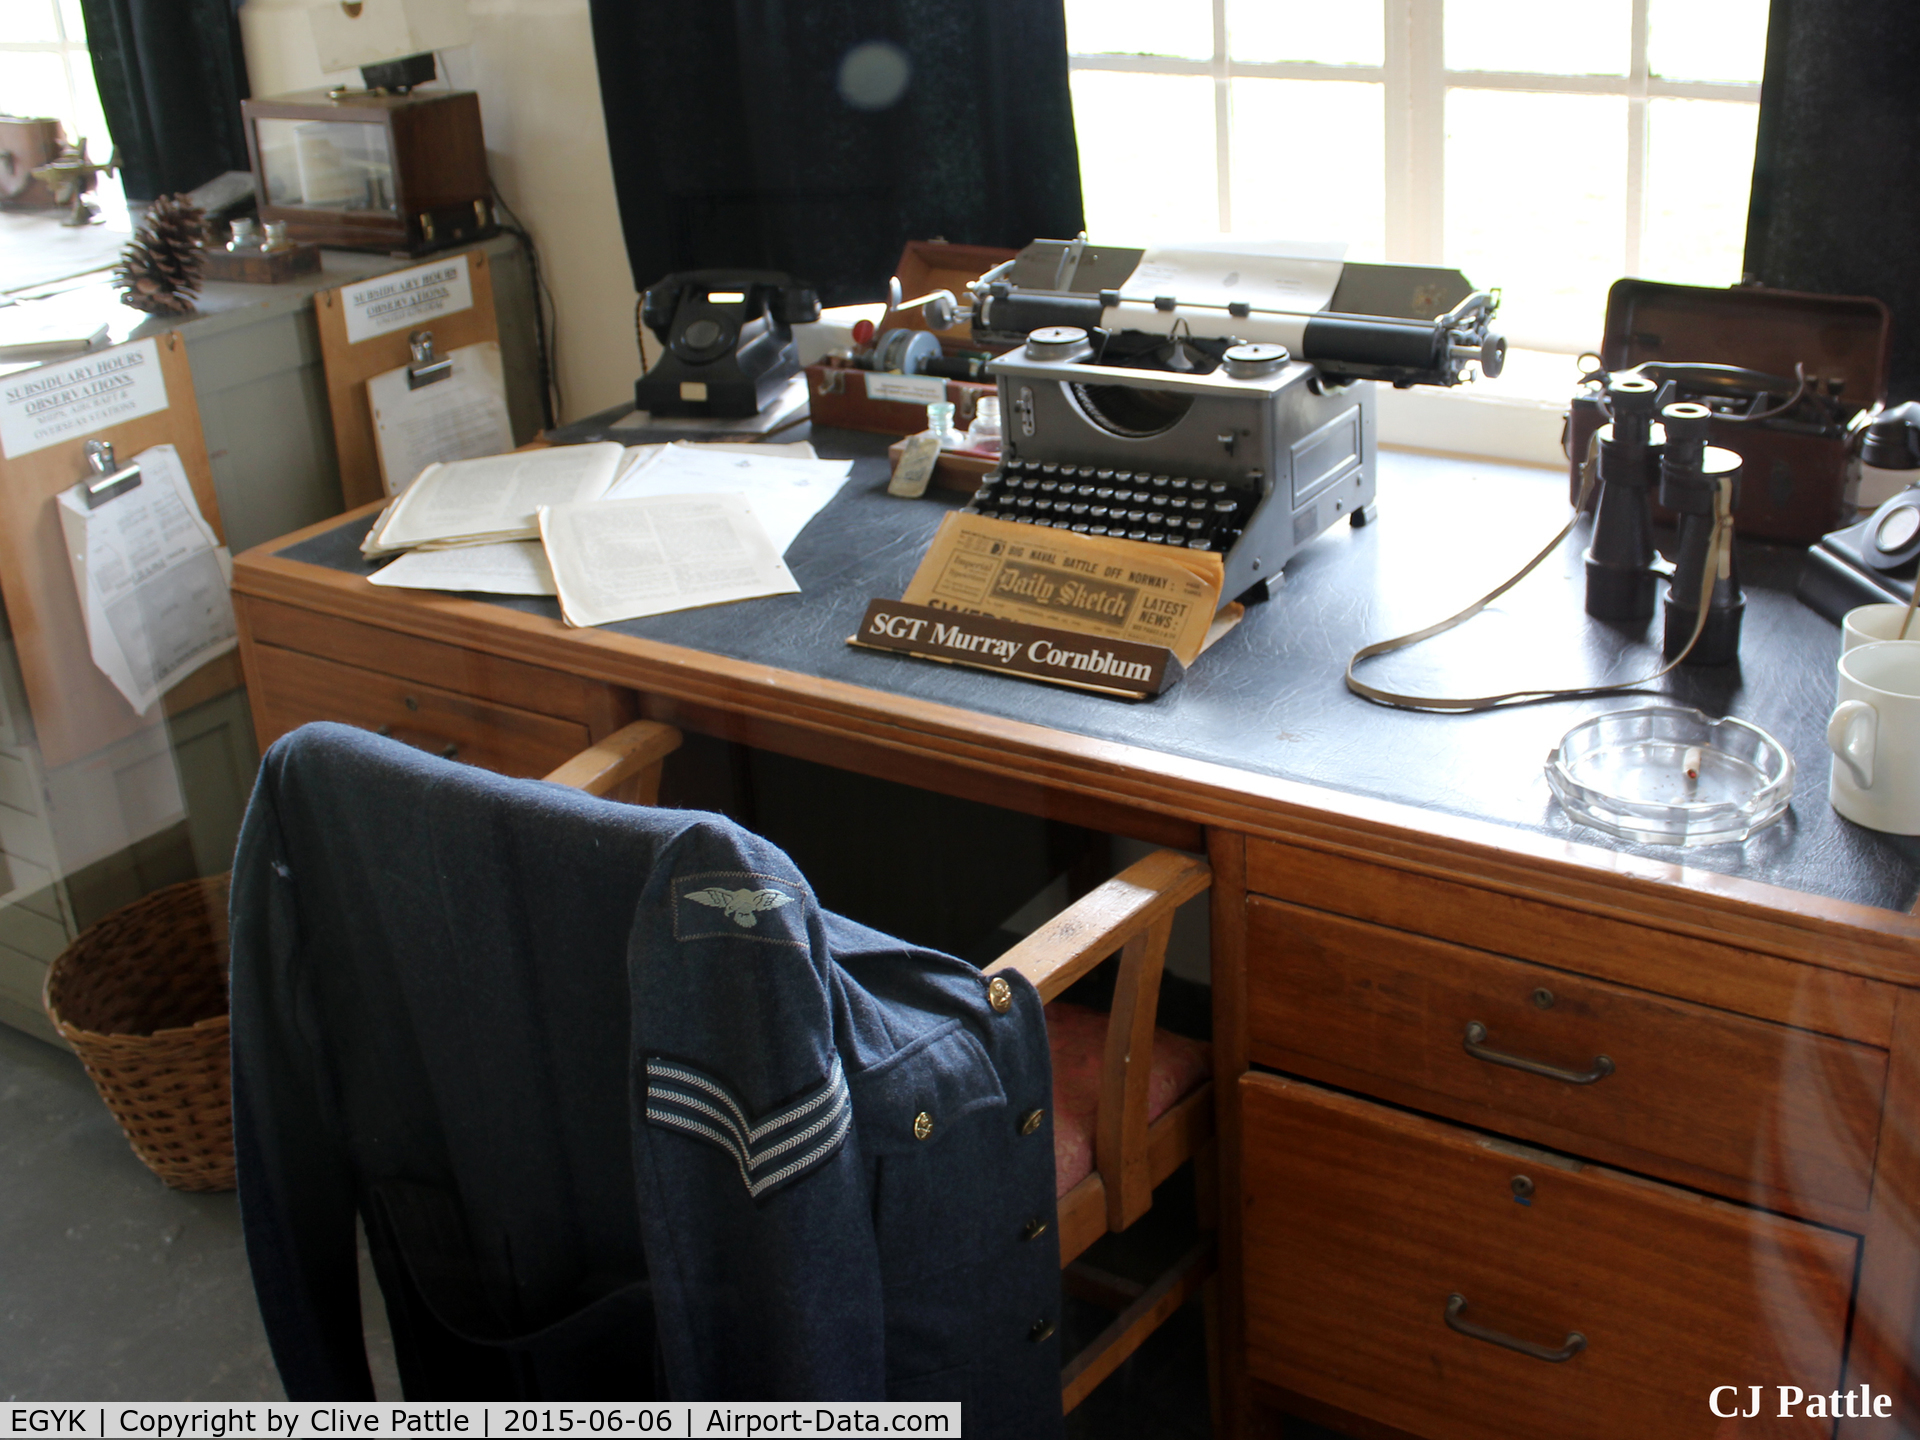 EGYK Airport - One of the excellent displays on the airfield, this time an office has been recreated within the Watchtower, showing the duty Met Sgt desk.